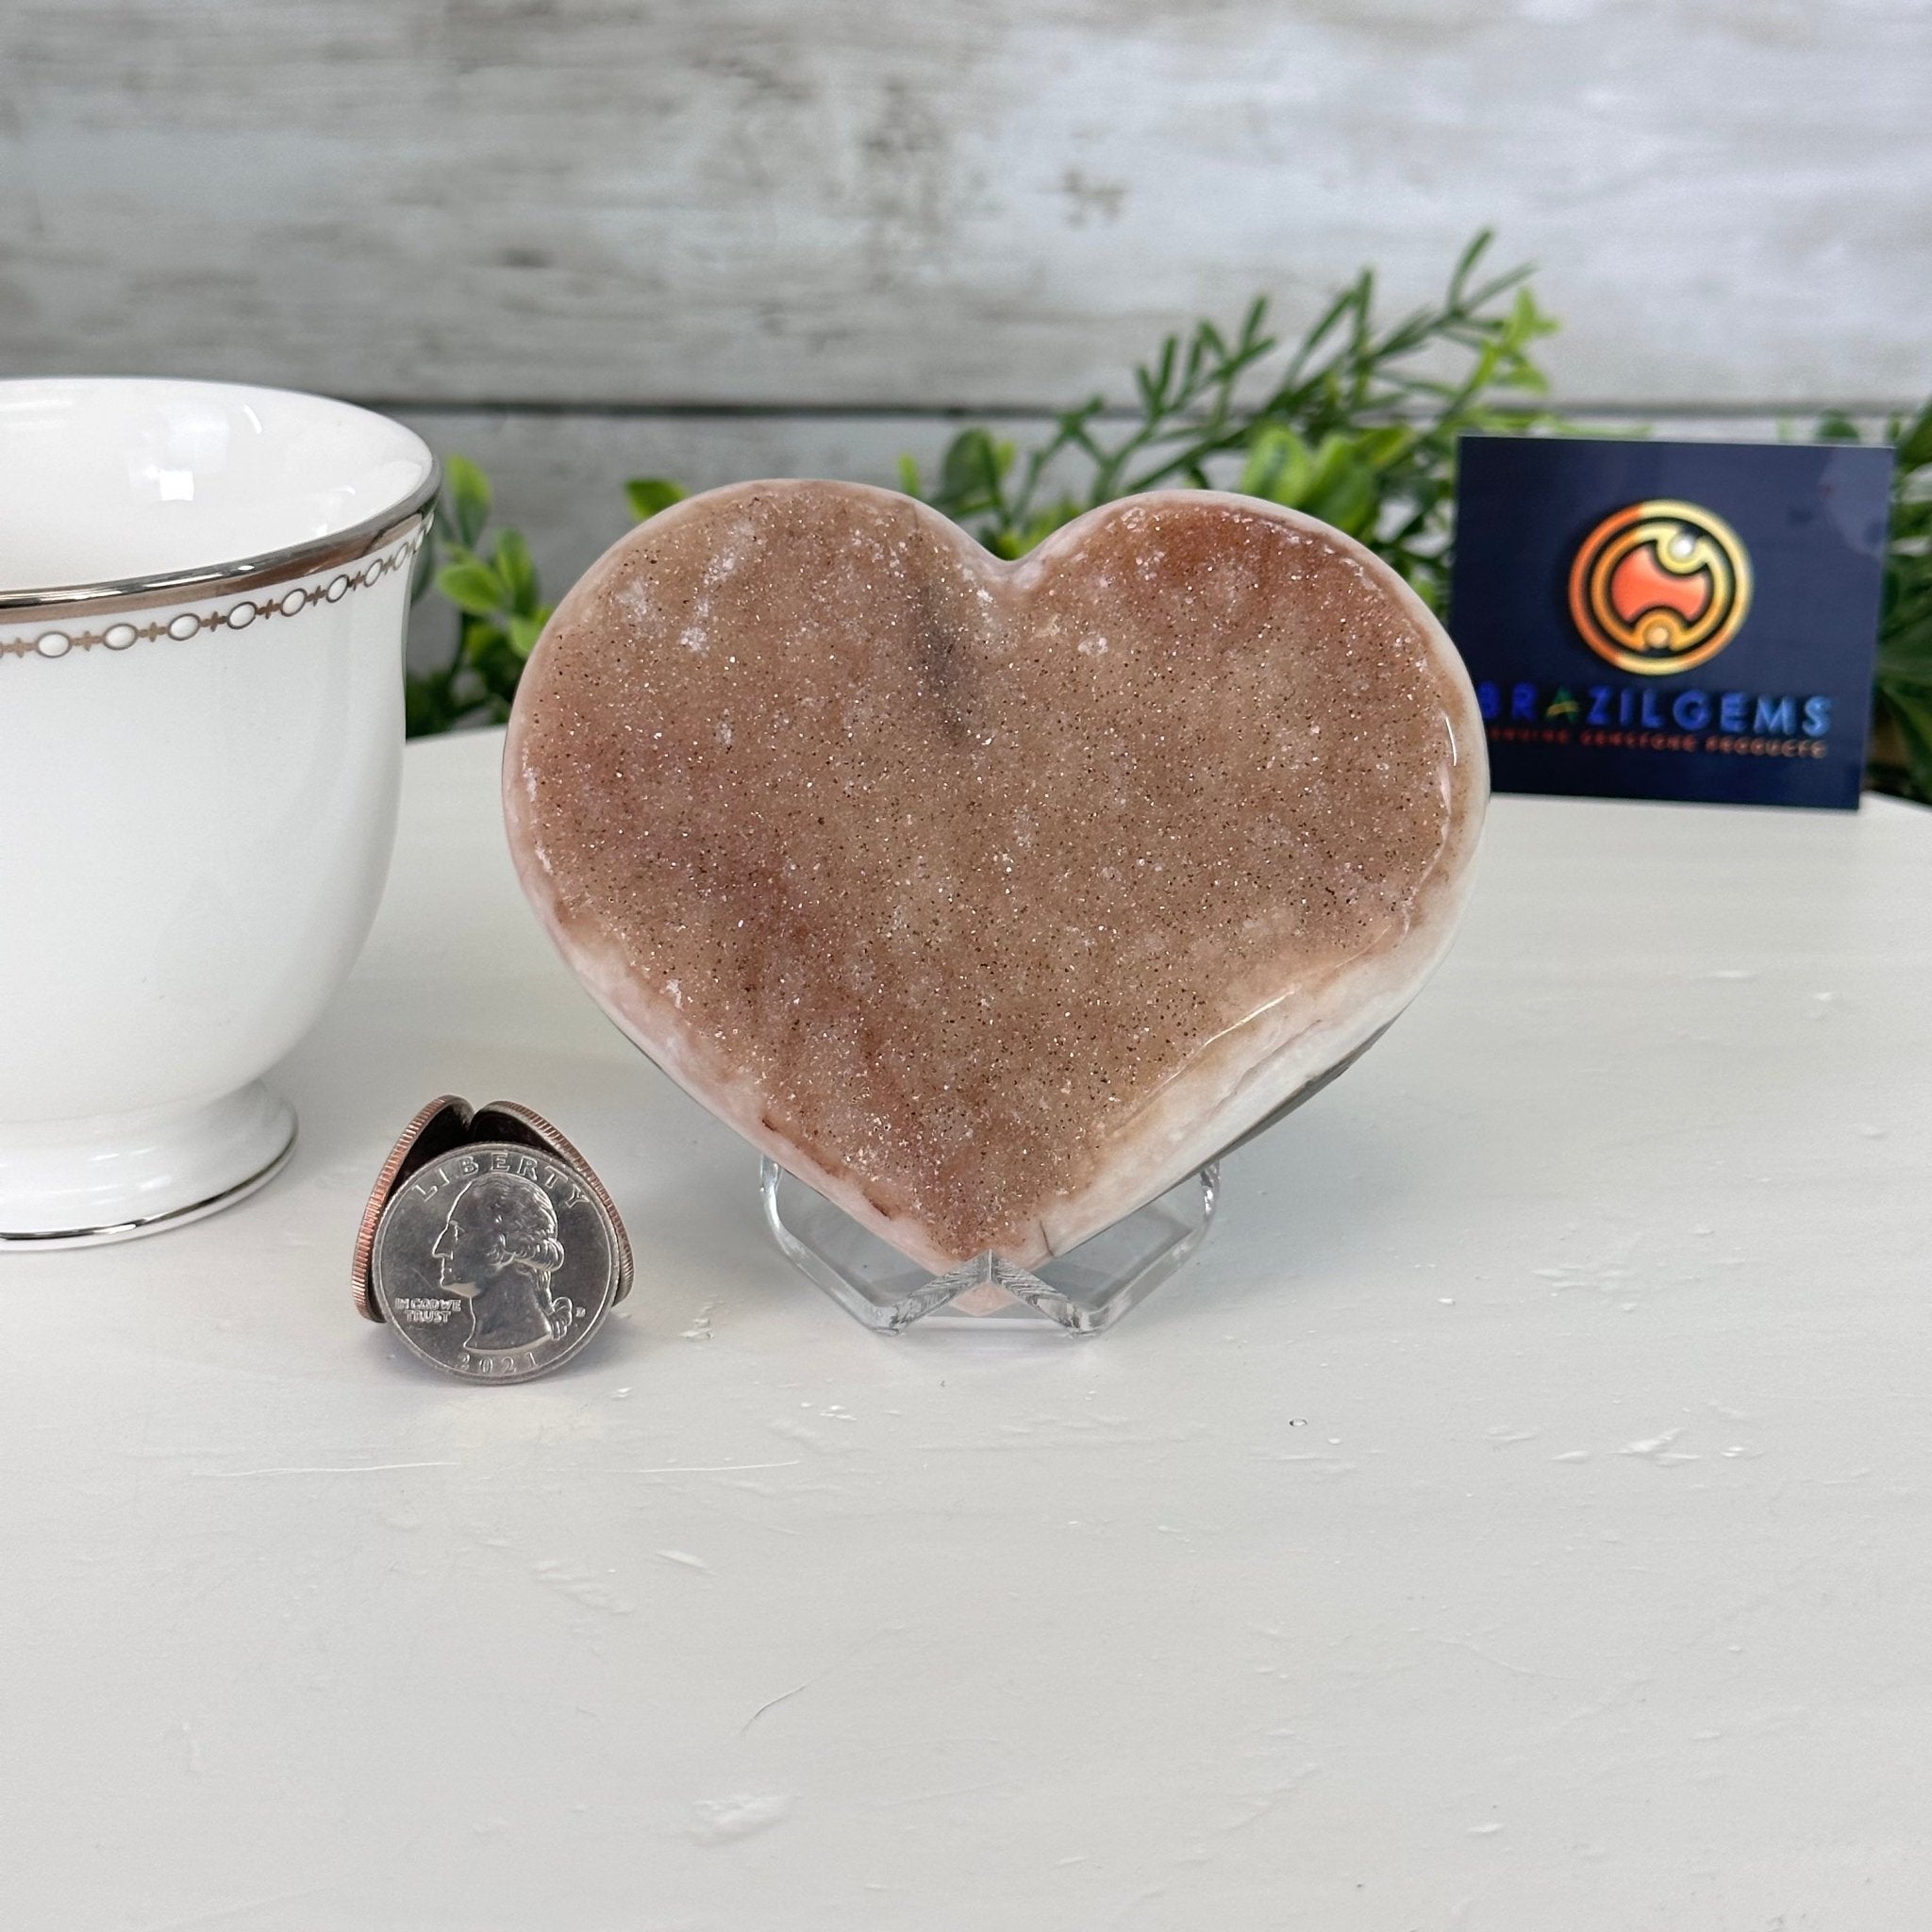 Extra Plus Quality Pink Amethyst Heart Geode on an Acrylic Stand, 0.98 lbs & 3" Tall #5462-0053 by Brazil Gems - Brazil GemsBrazil GemsExtra Plus Quality Pink Amethyst Heart Geode on an Acrylic Stand, 0.98 lbs & 3" Tall #5462-0053 by Brazil GemsHearts5462-0053